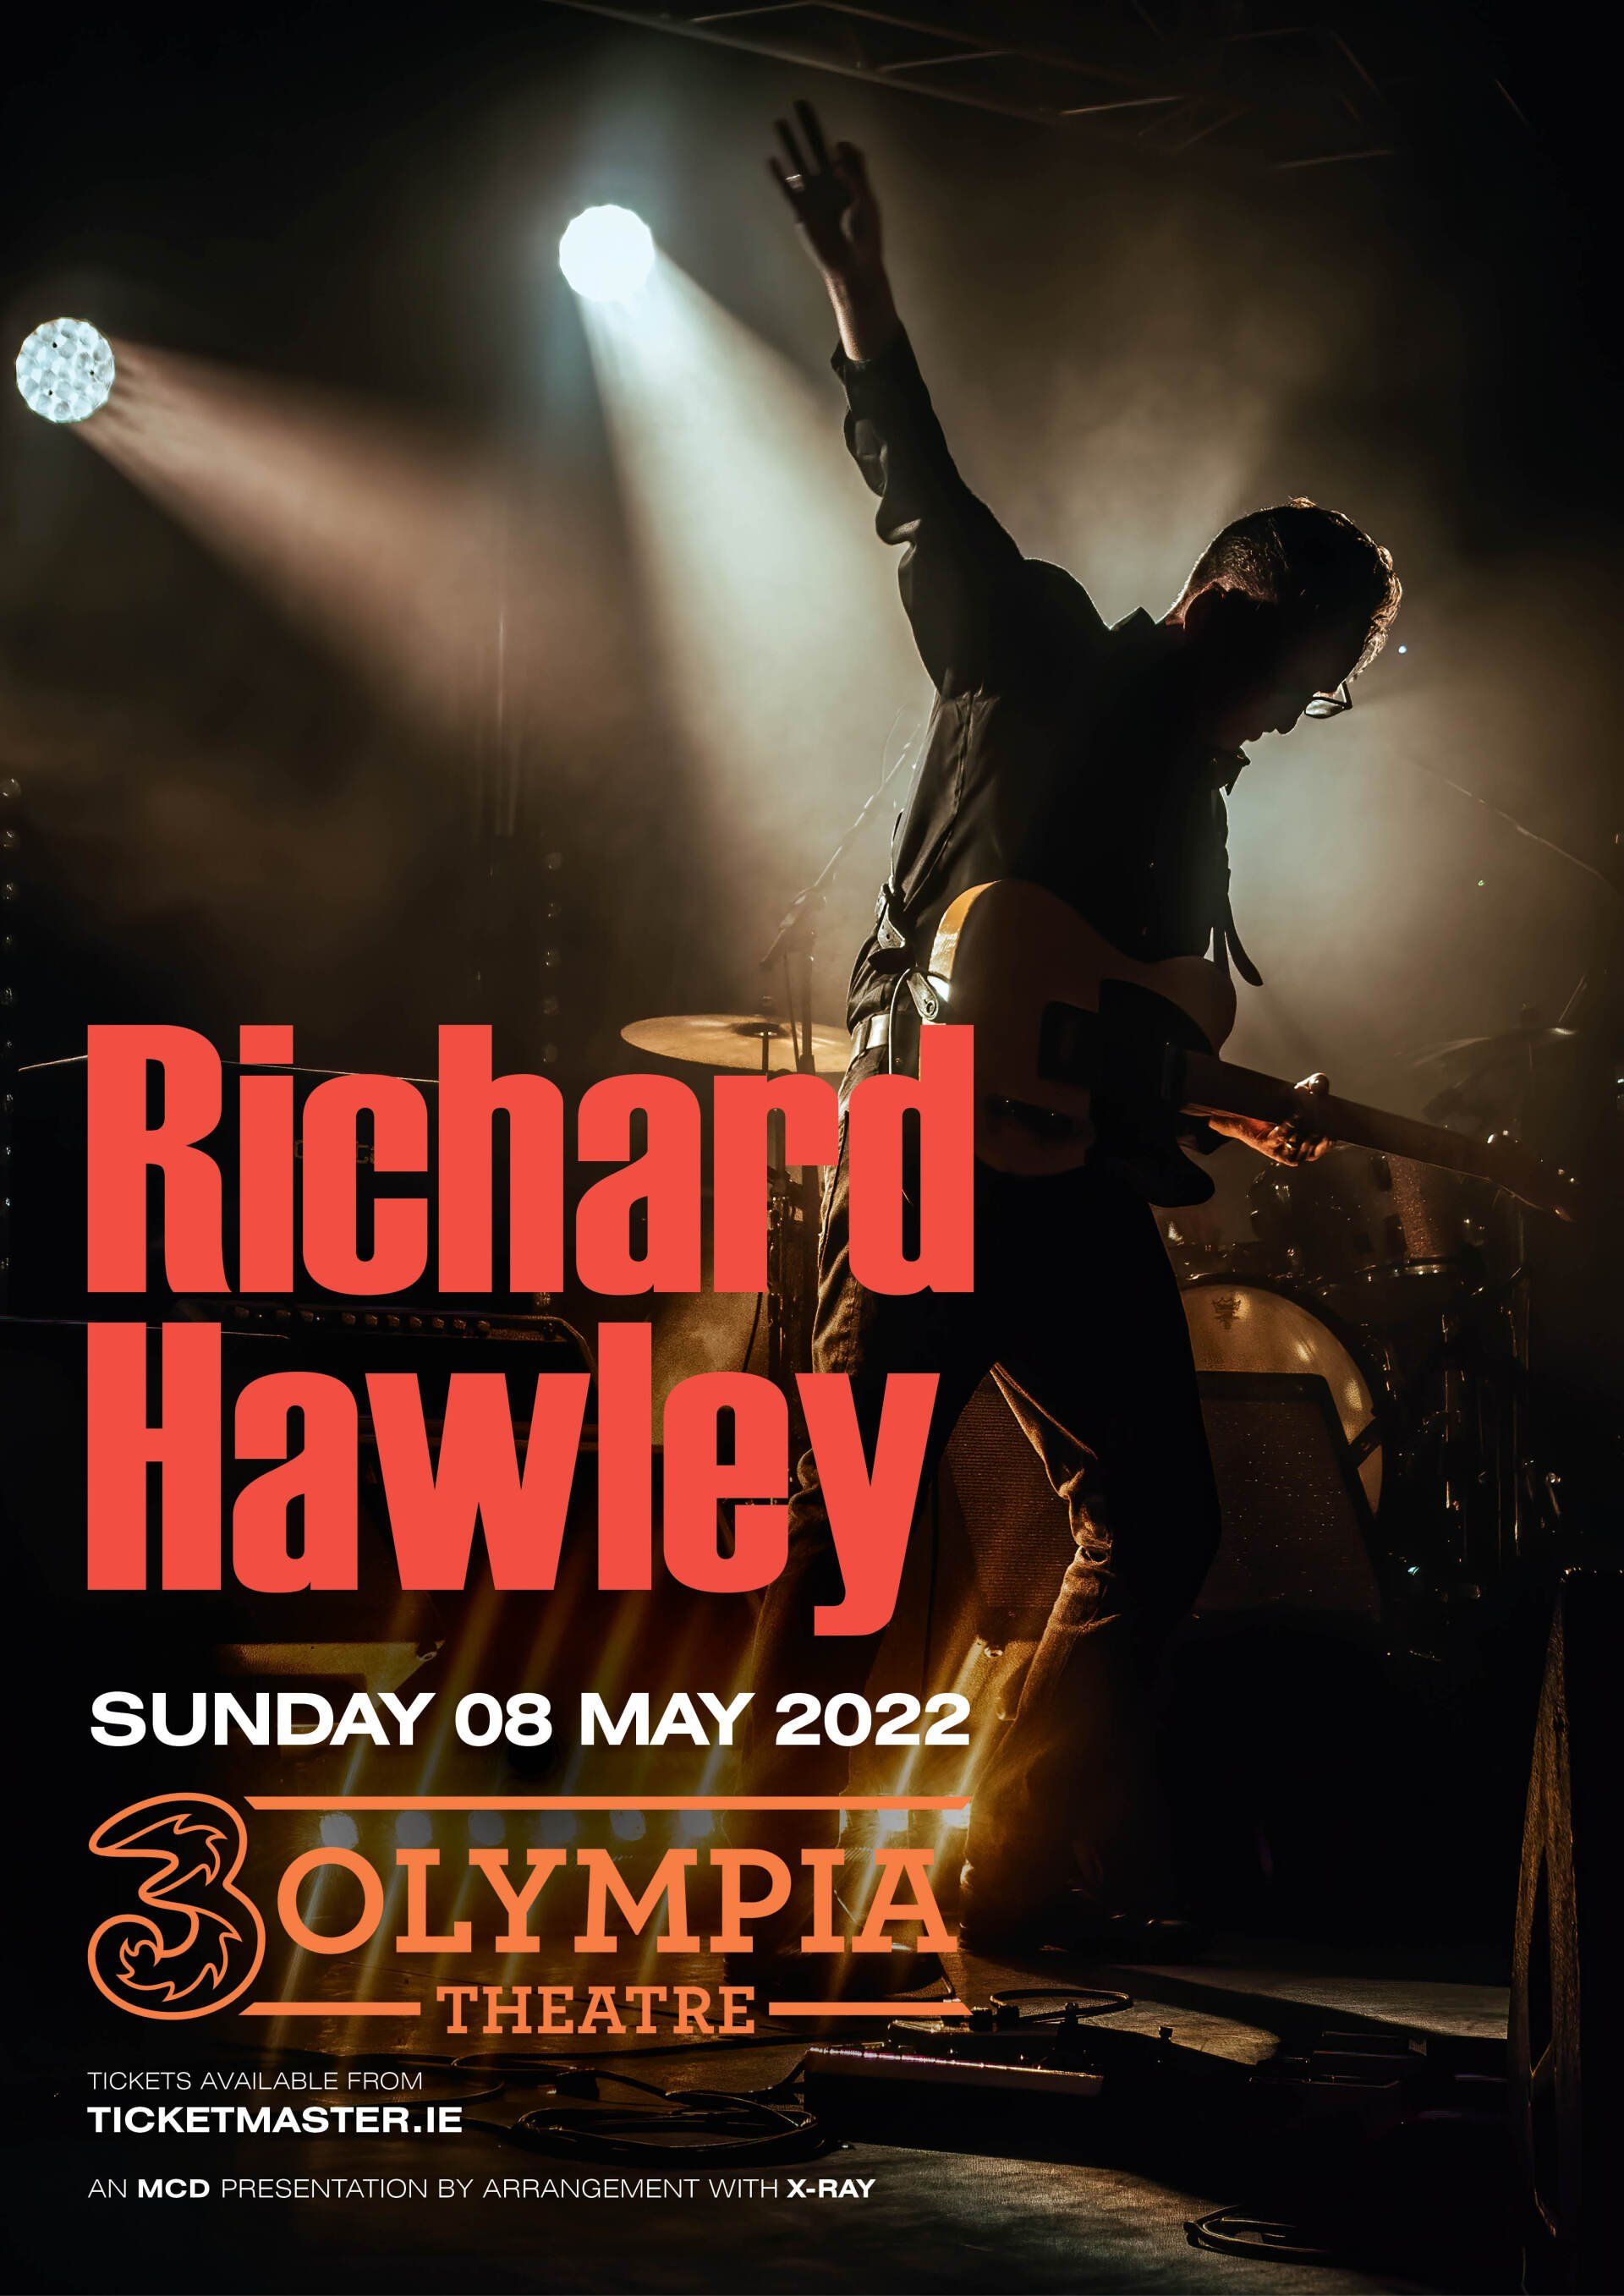 RICHARD HAWLEY CONFIRMS 3OLYMPIA CONCERT DATE